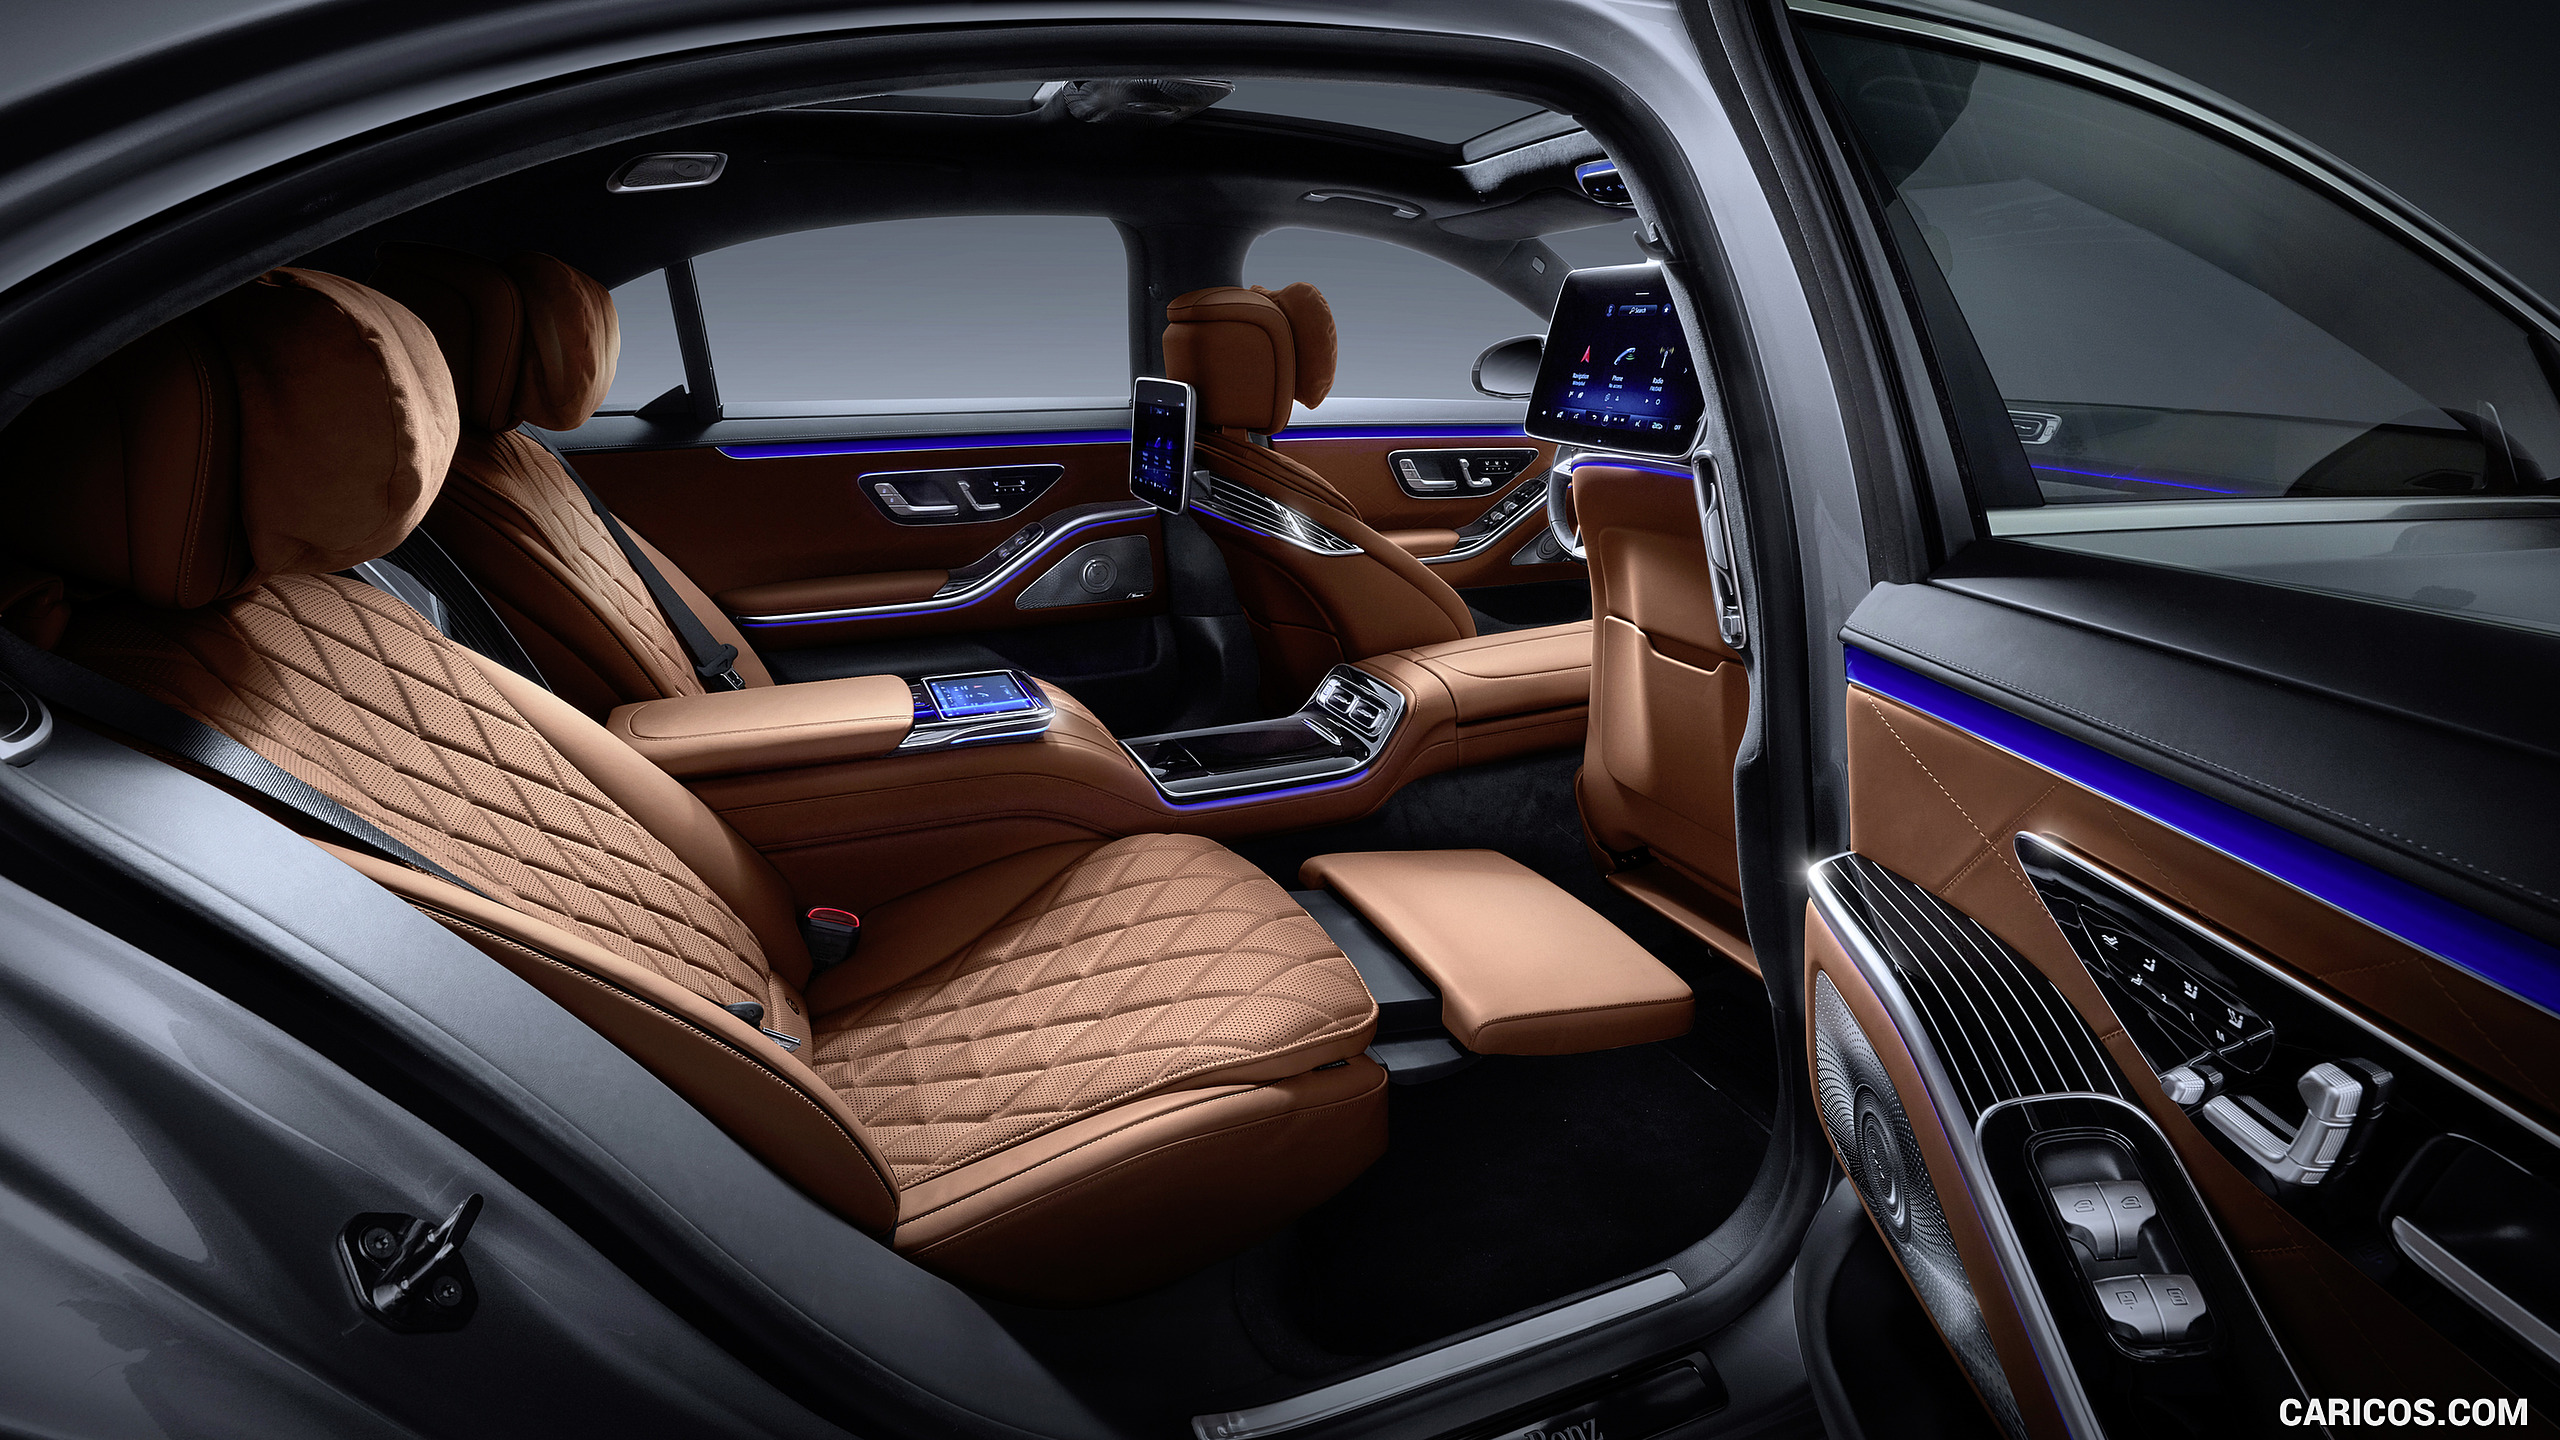 2021 Mercedes-Benz S-Class (Color: Leather Siena Brown) - Interior, Rear Seats, #140 of 316